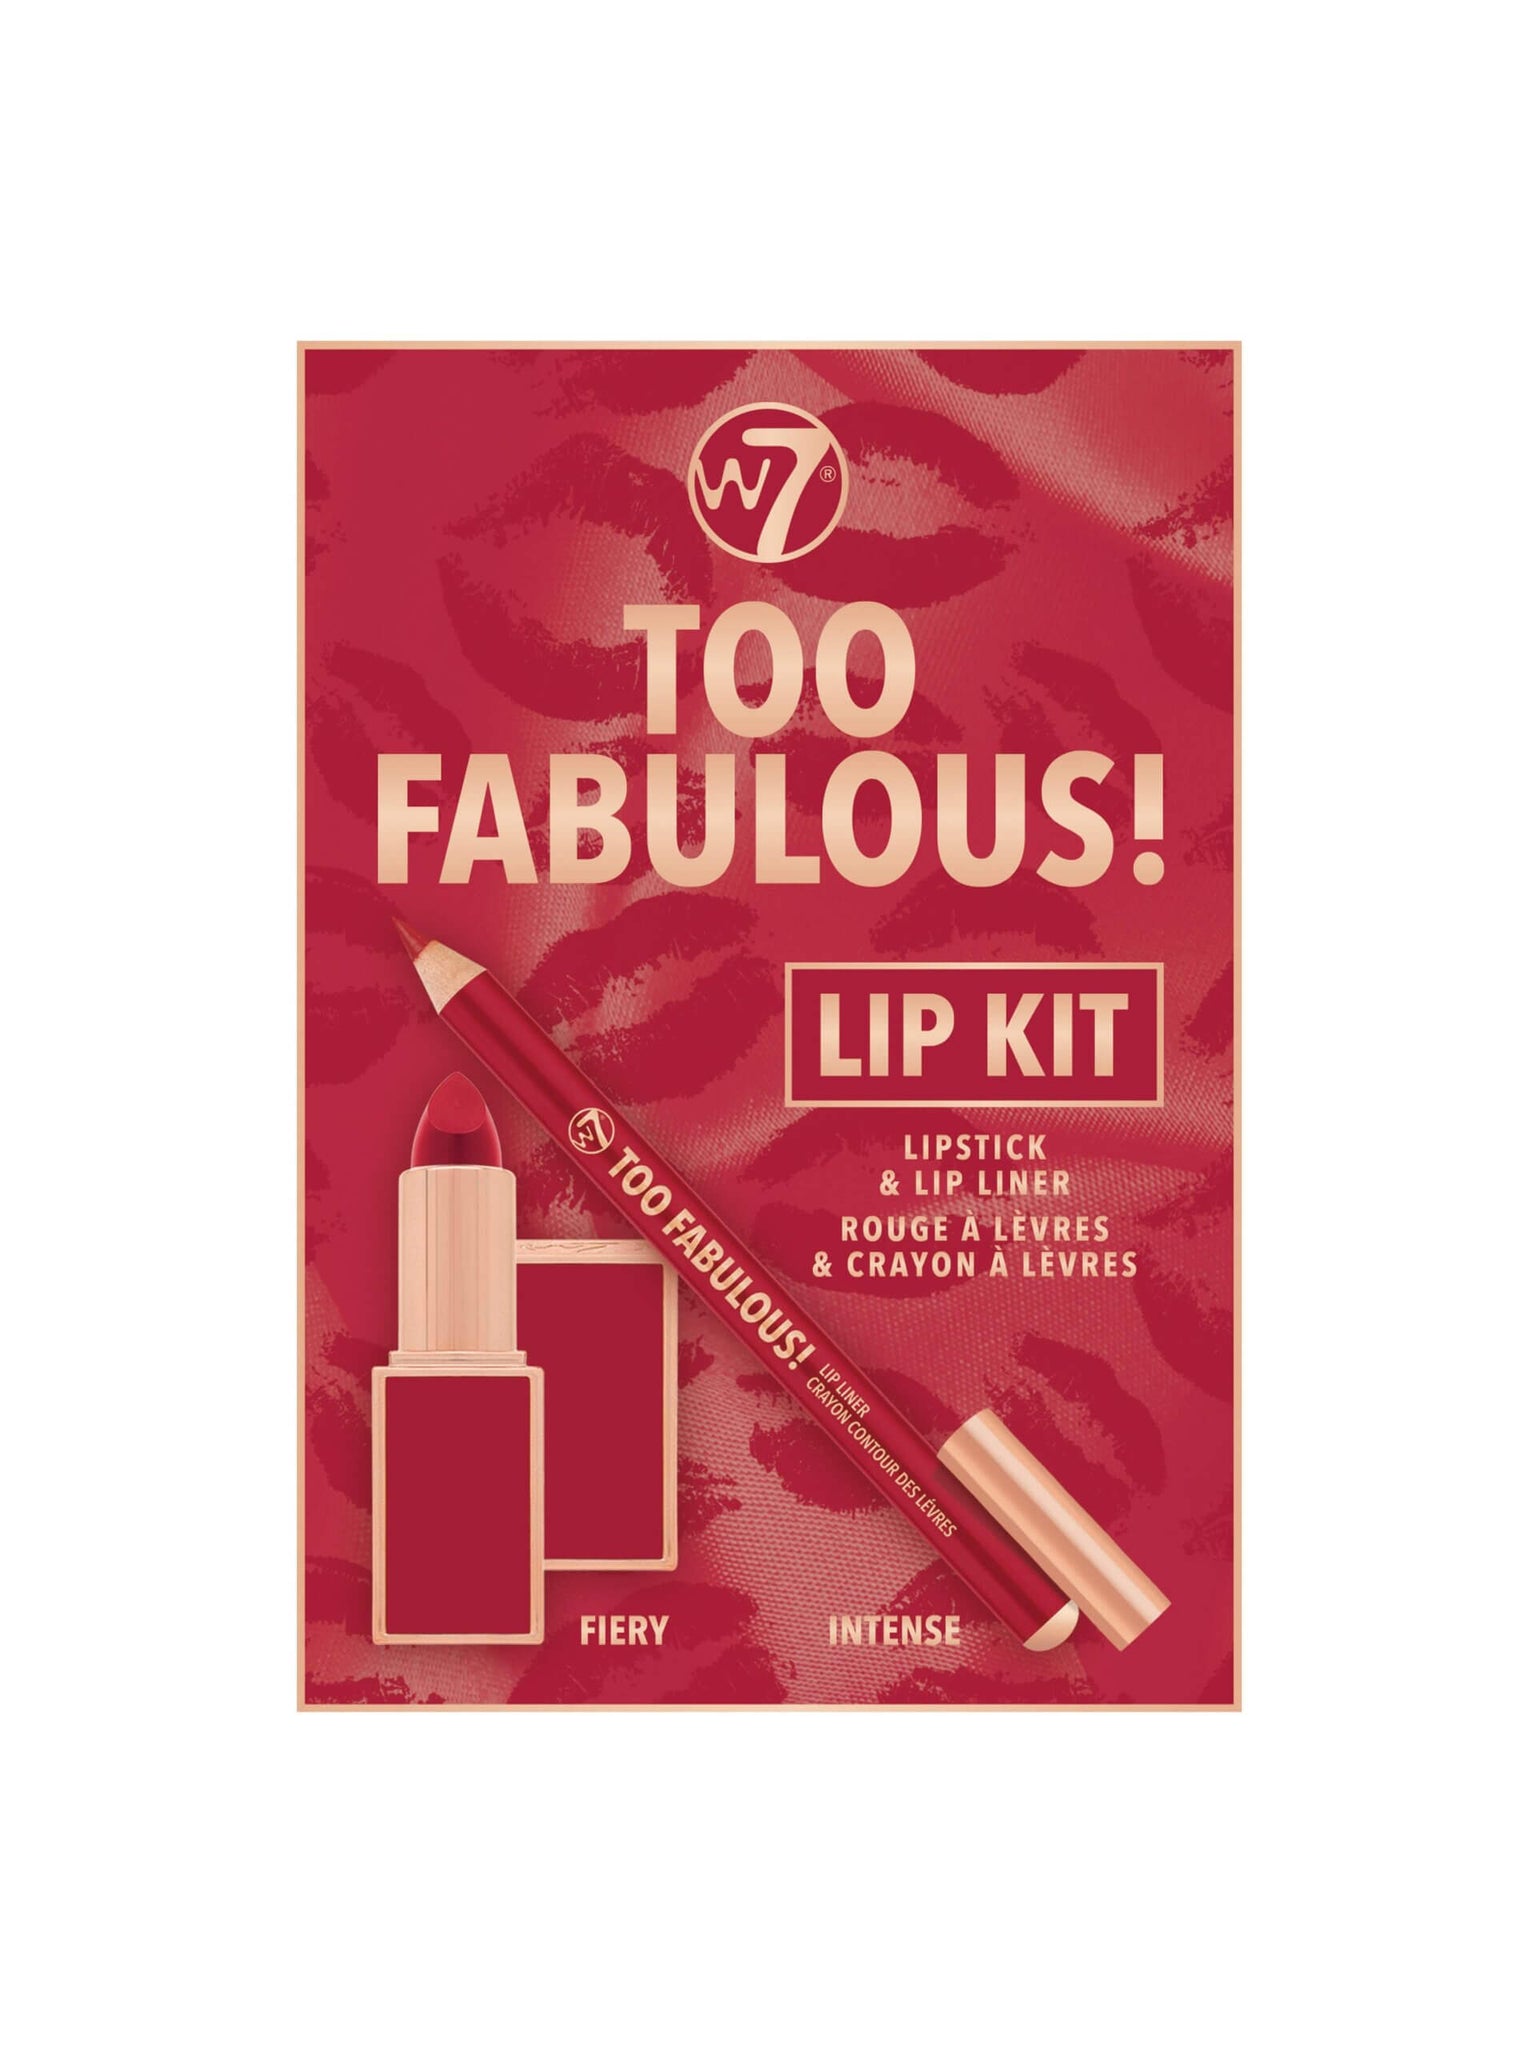 W7 Too Fabulous Lip Kit Lipstick and Lip Liner Duo Gift Set